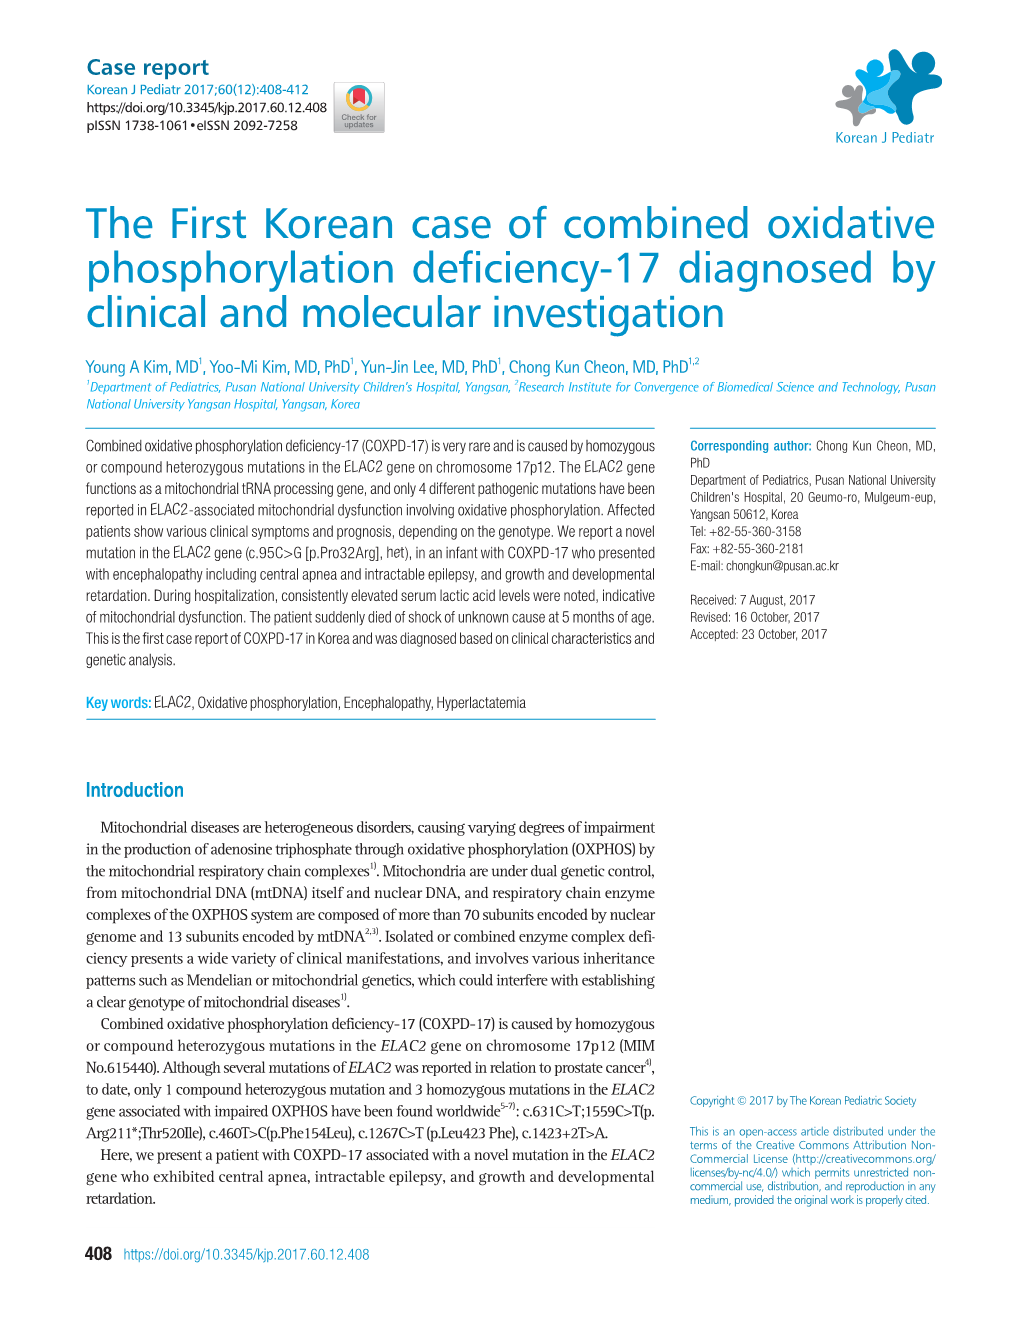 The First Korean Case of Combined Oxidative Phos Phorylation